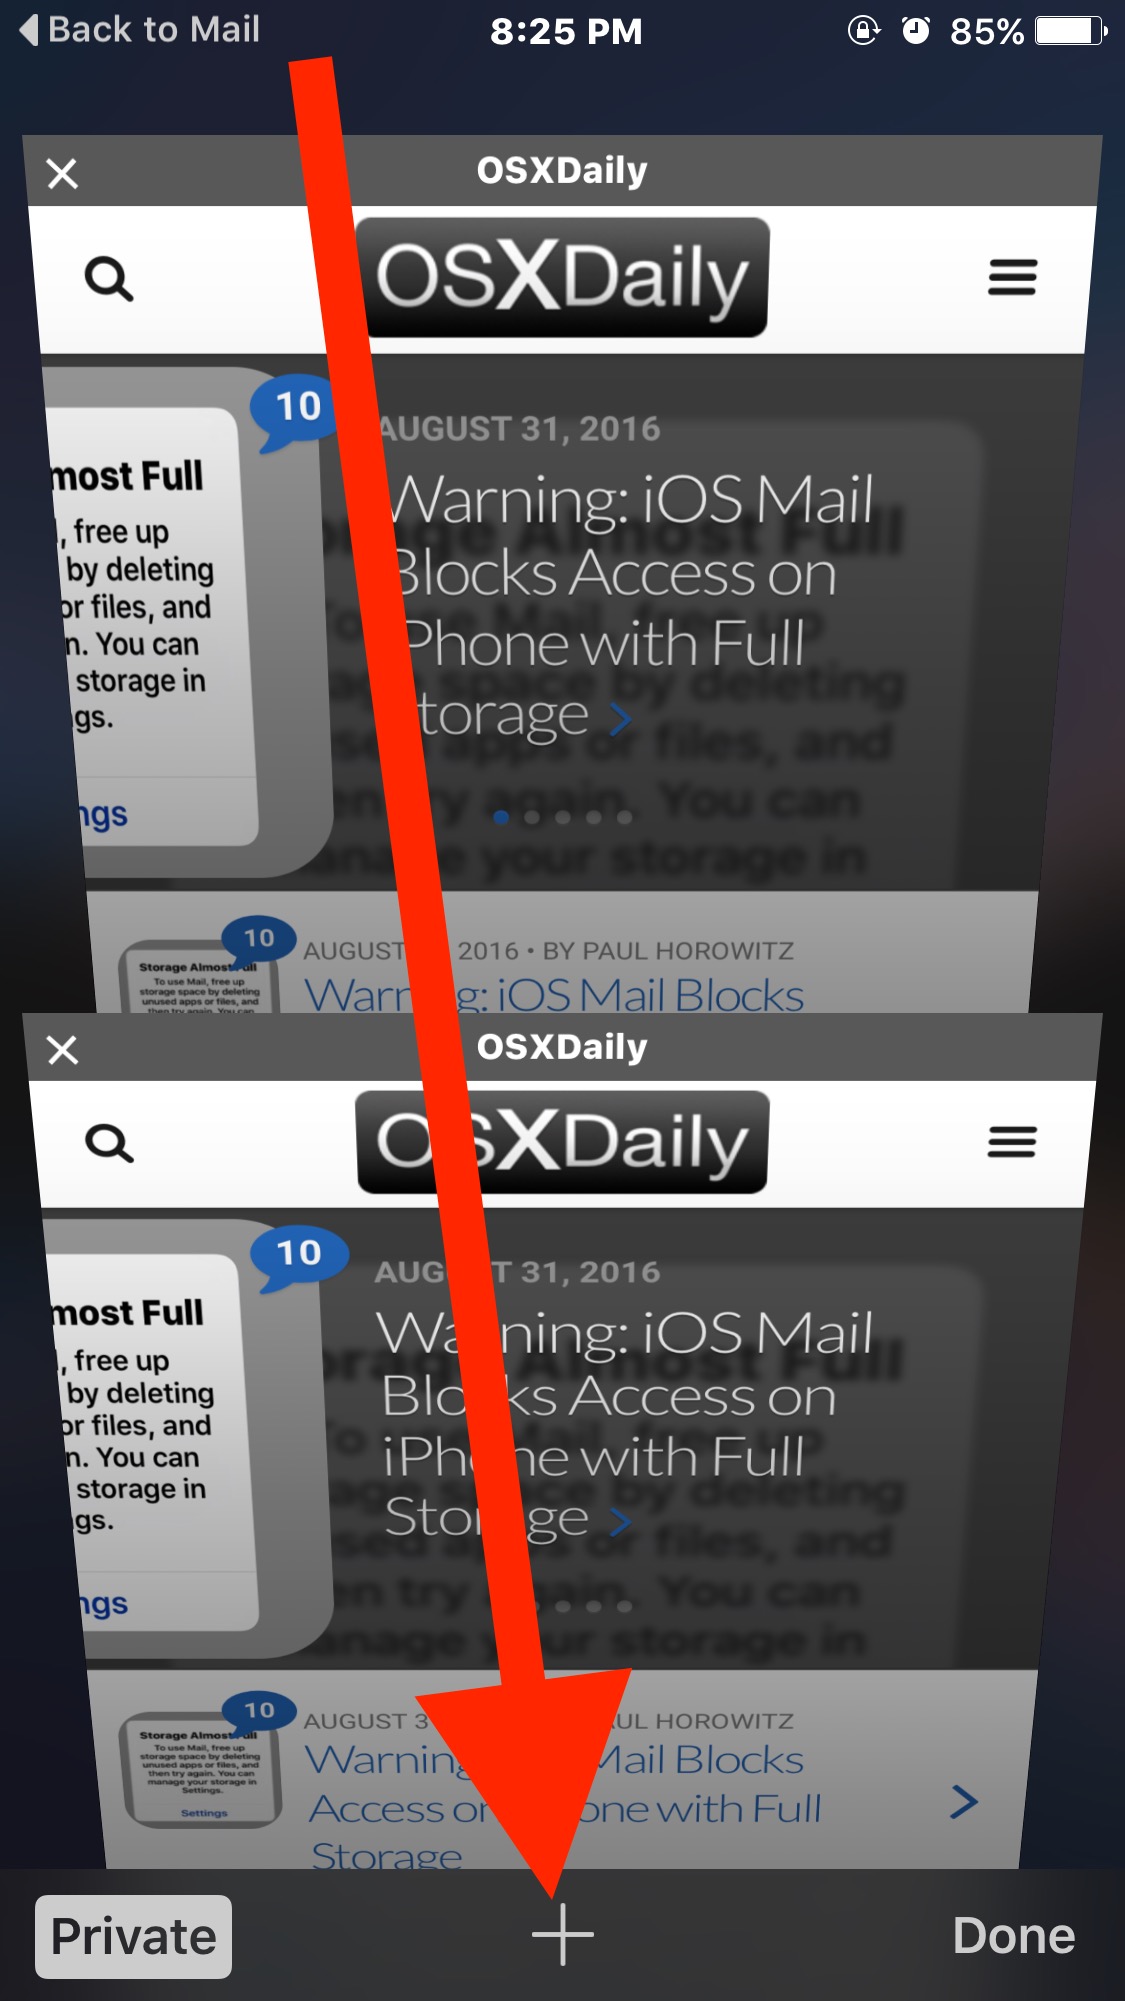 safari reopen tabs after quit